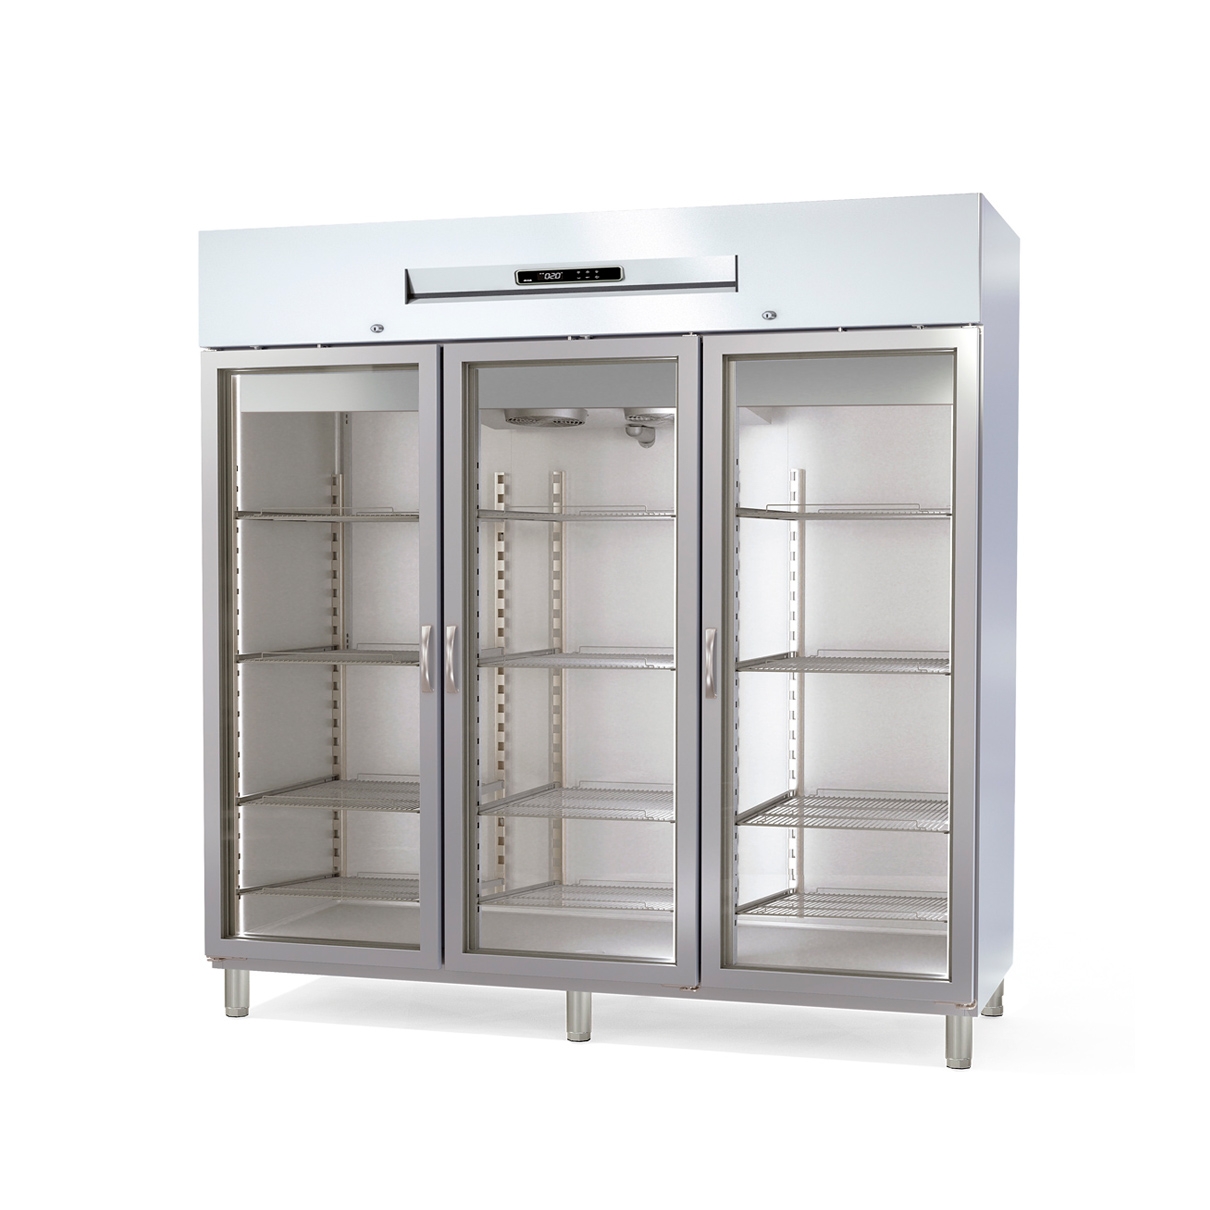 Gastronorm 2/1 Refrigerated Cabinet ARGV-210-3